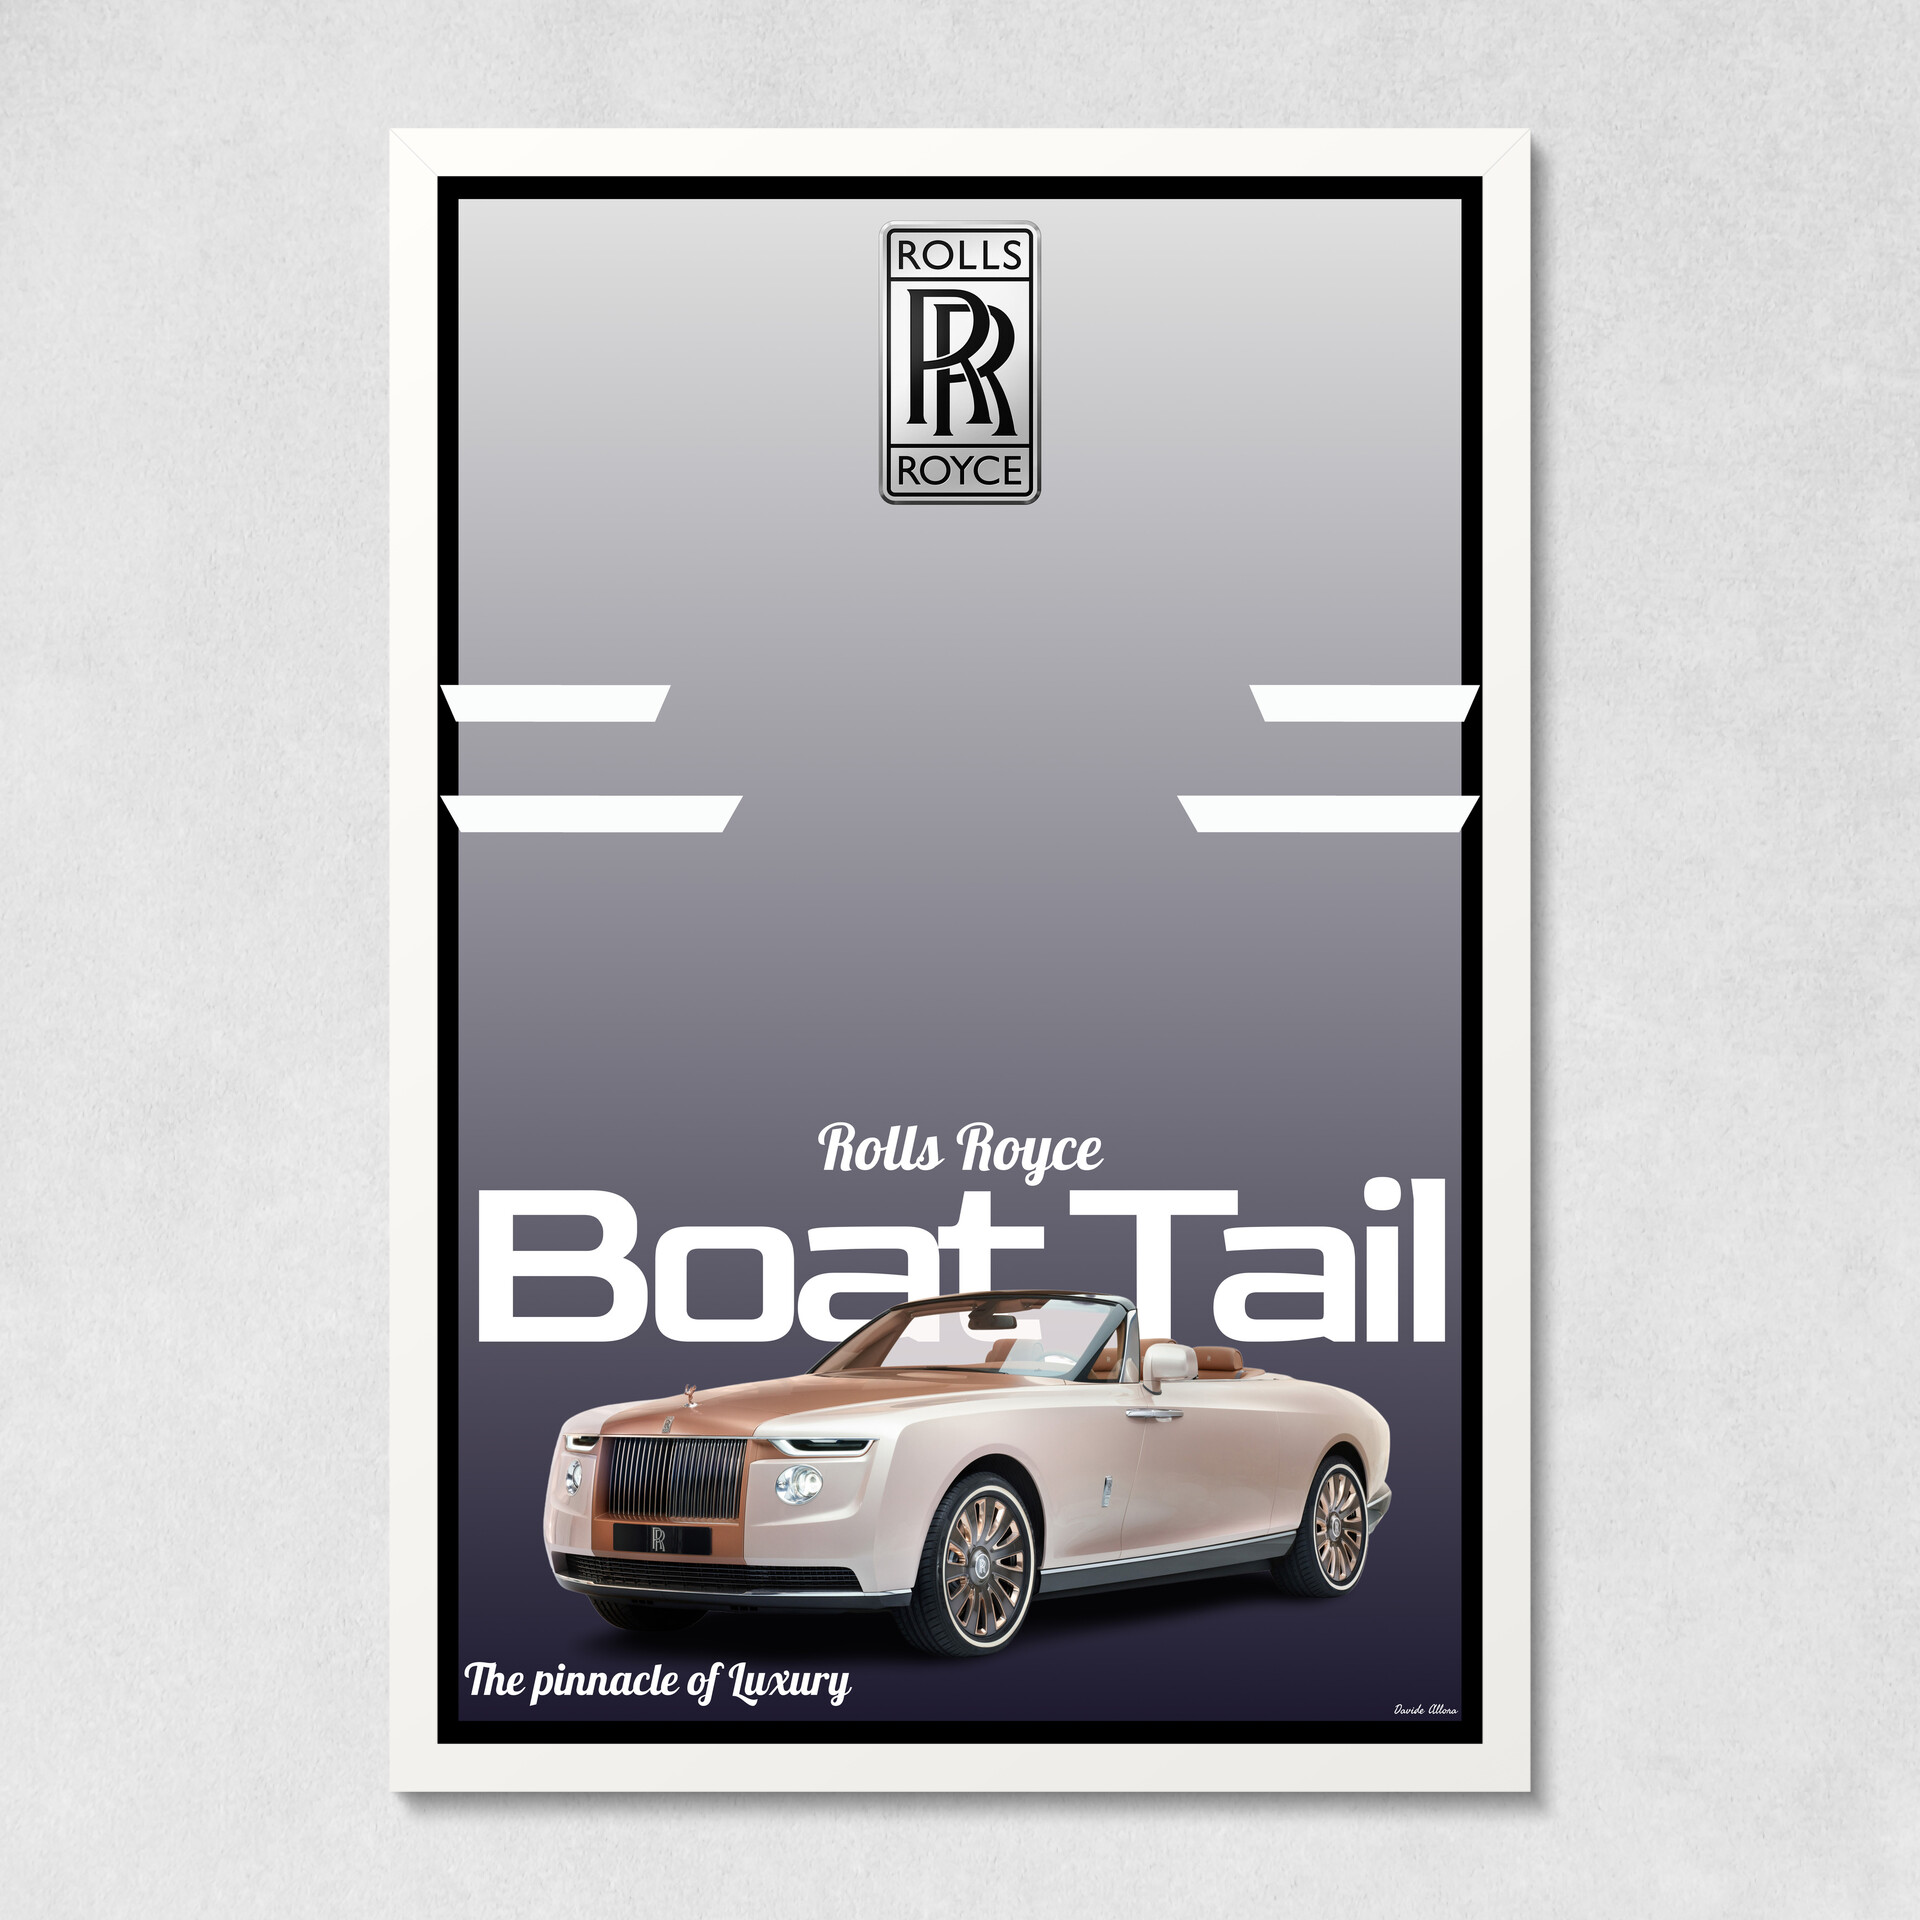 The New Rolls-Royce Boat Tail - Design Review 